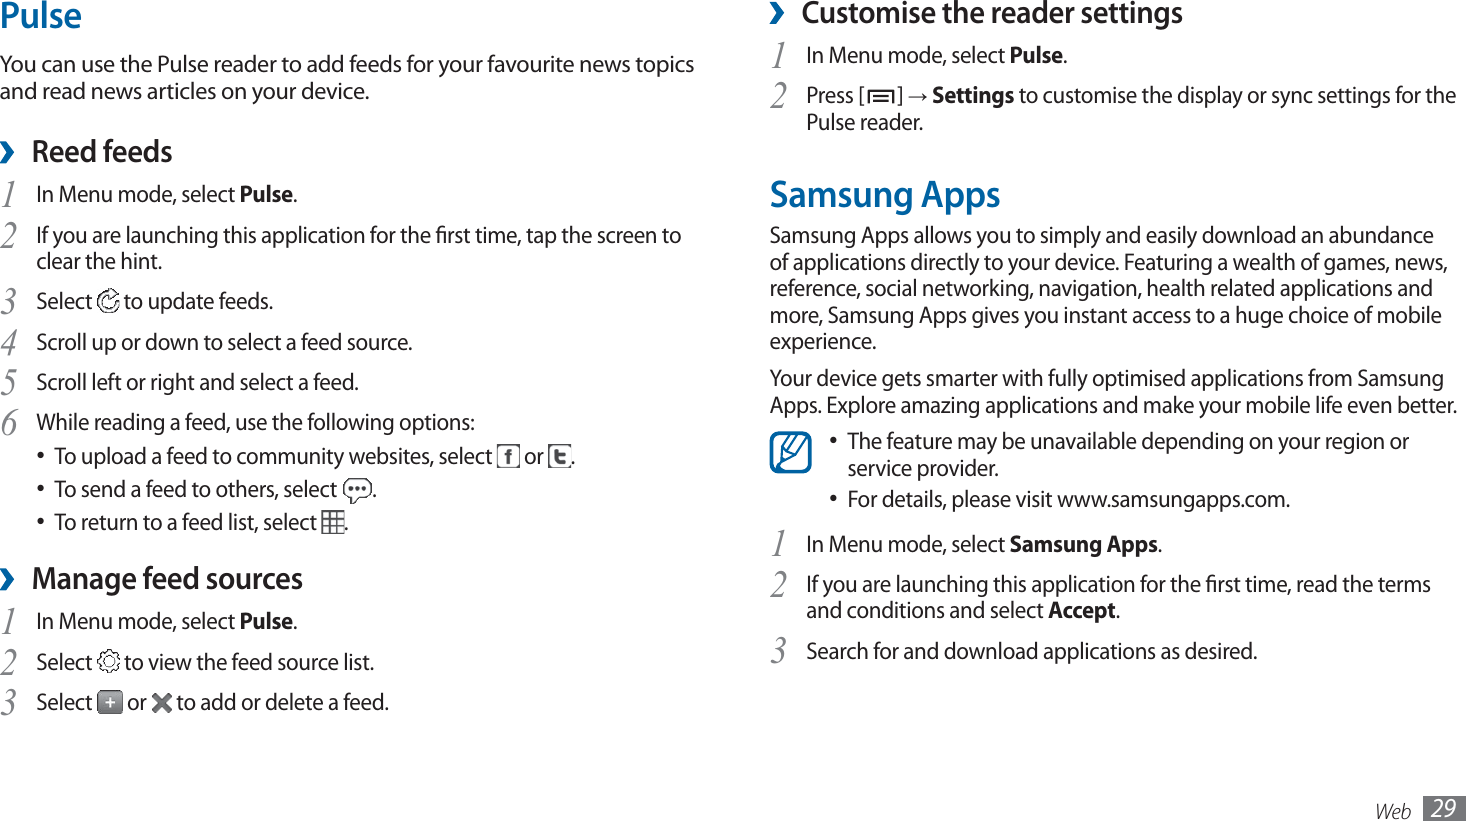 Web 29Customise the reader settings ›In Menu mode, select 1 Pulse.Press [2 ] → Settings to customise the display or sync settings for the Pulse reader.Samsung AppsSamsung Apps allows you to simply and easily download an abundance of applications directly to your device. Featuring a wealth of games, news, reference, social networking, navigation, health related applications and more, Samsung Apps gives you instant access to a huge choice of mobile experience.Your device gets smarter with fully optimised applications from Samsung Apps. Explore amazing applications and make your mobile life even better.The feature may be unavailable depending on your region or • service provider.For details, please visit www.samsungapps.com.• In Menu mode, select 1 Samsung Apps.If you are launching this application for the rst time, read the terms 2 and conditions and select Accept.Search for and download applications as desired.3 PulseYou can use the Pulse reader to add feeds for your favourite news topics and read news articles on your device.Reed feeds ›In Menu mode, select 1 Pulse.If you are launching this application for the rst time, tap the screen to 2 clear the hint.Select 3  to update feeds.Scroll up or down to select a feed source.4 Scroll left or right and select a feed.5 While reading a feed, use the following options:6 To upload a feed to community websites, select •   or  .To send a feed to others, select •  .To return to a feed list, select •  .Manage feed sources ›In Menu mode, select 1 Pulse.Select 2  to view the feed source list.Select 3  or   to add or delete a feed.